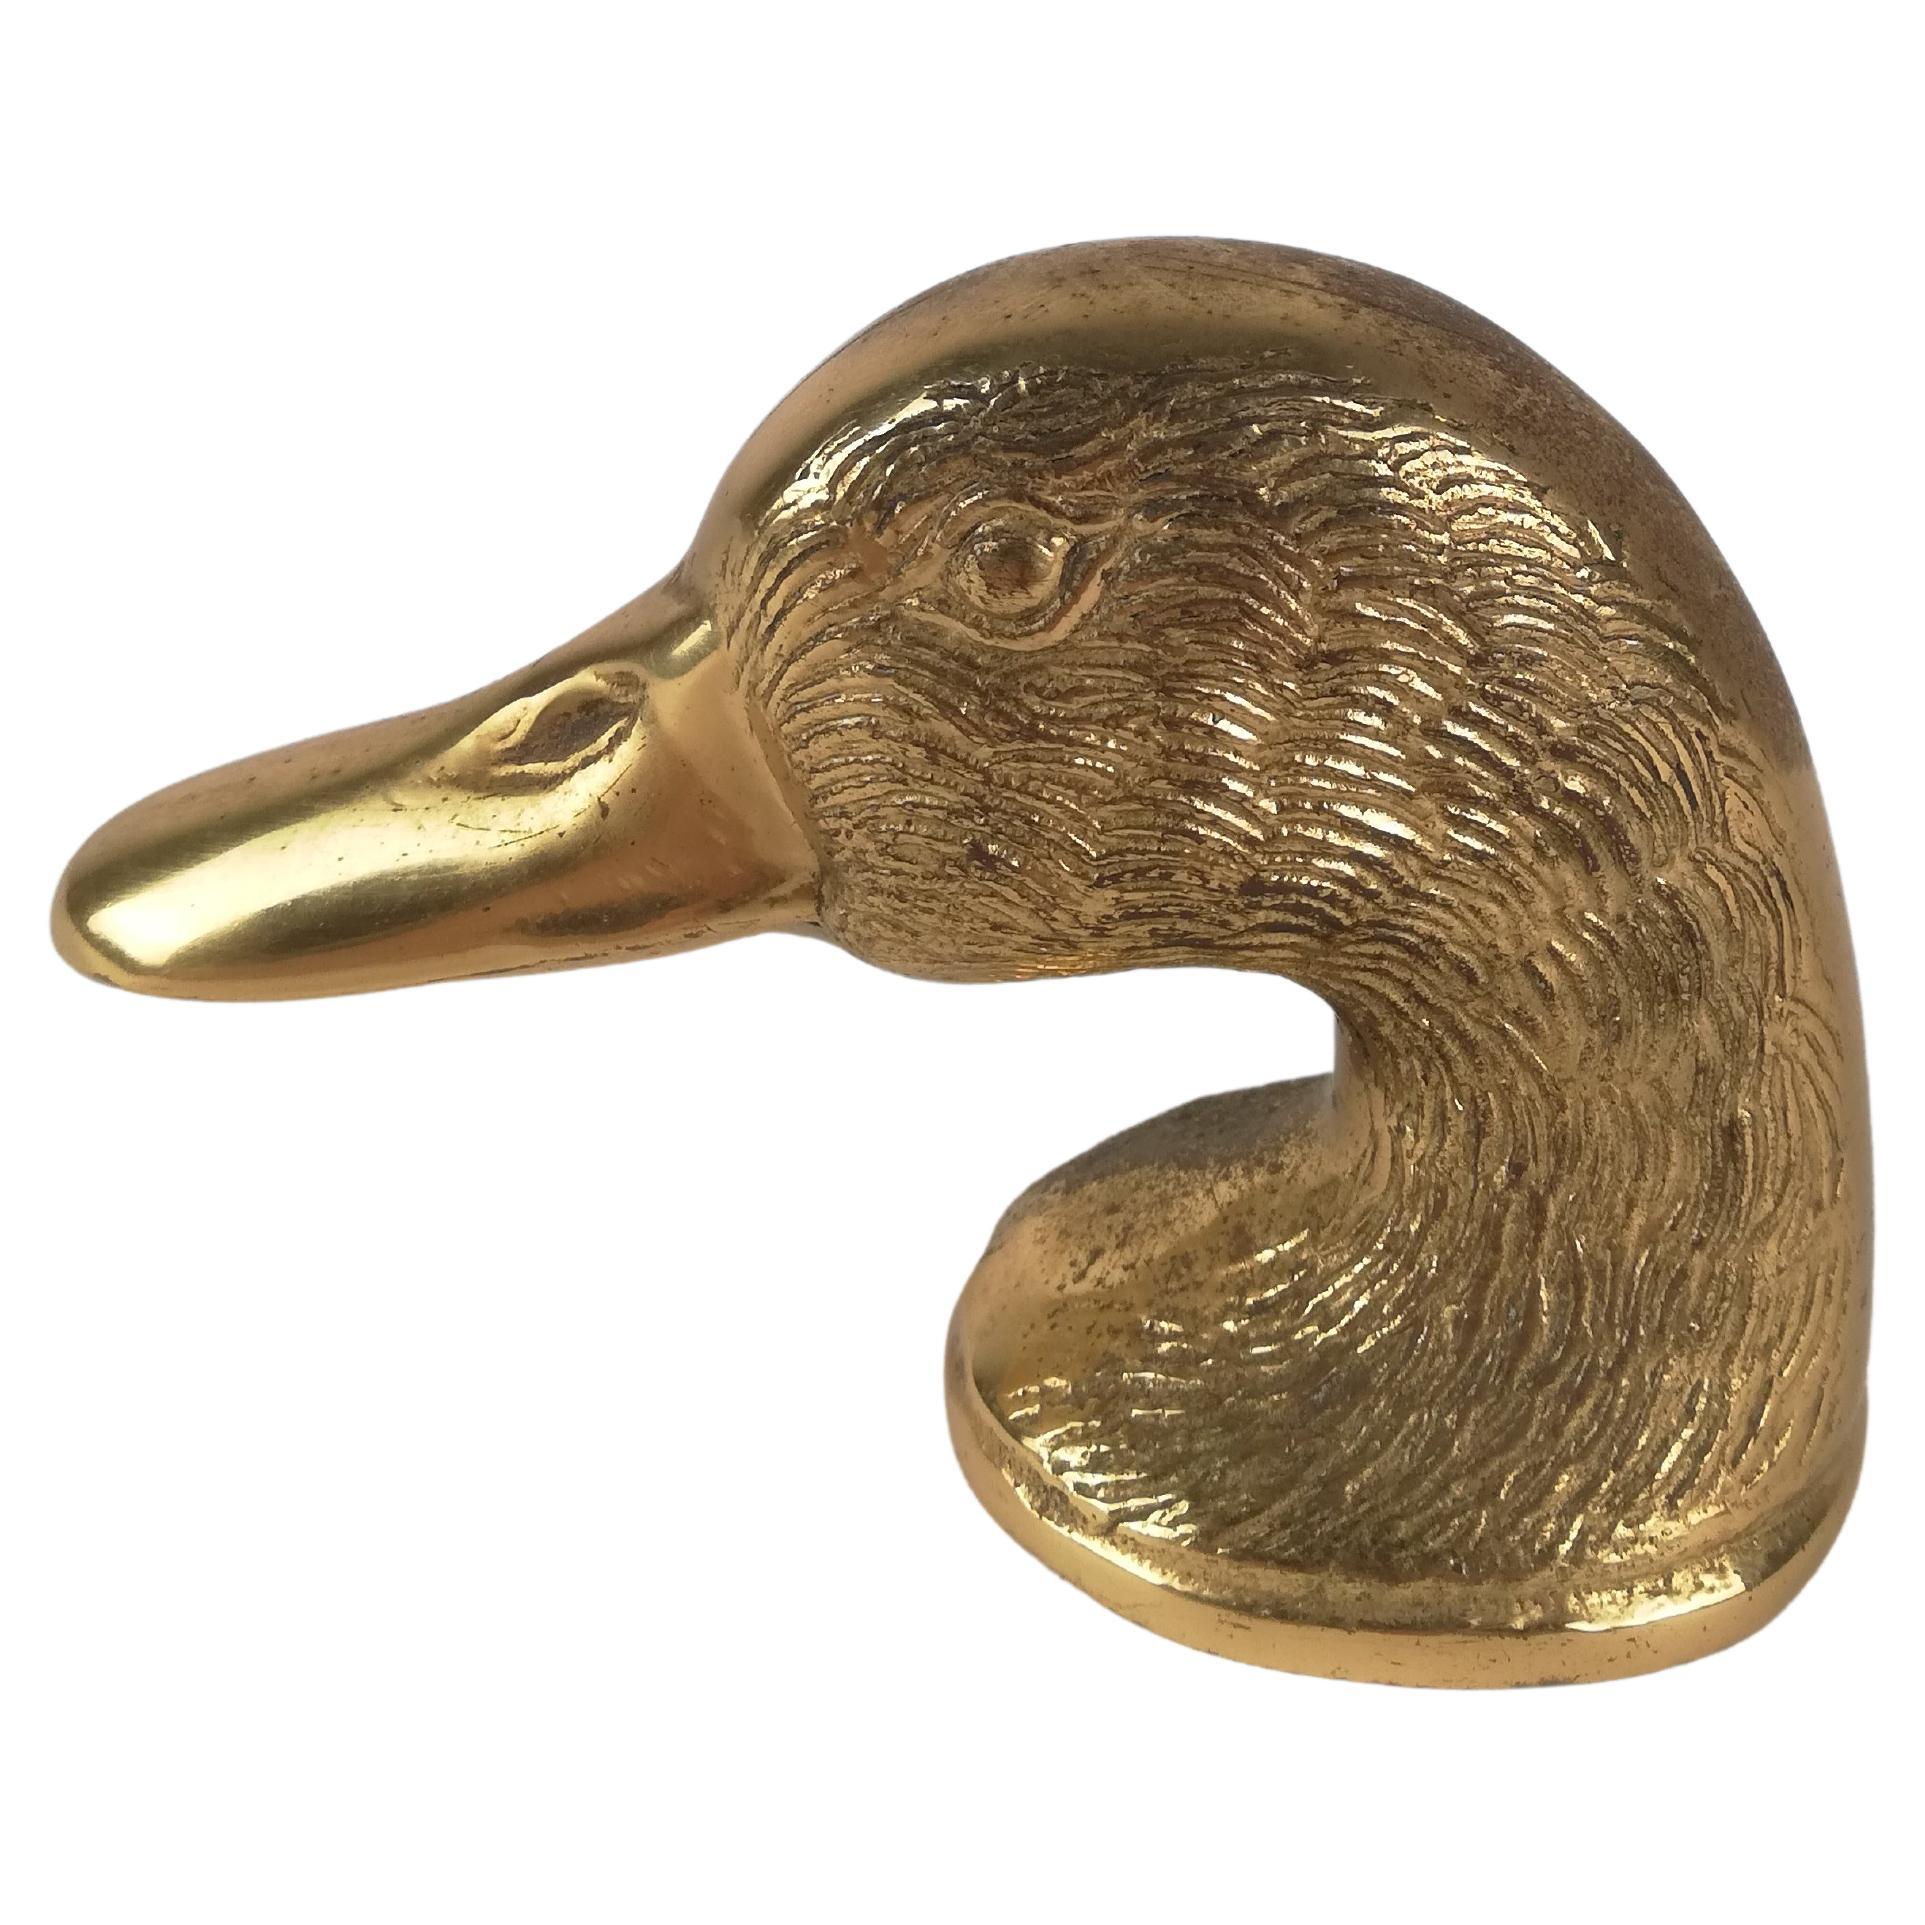 Vintage Animal's Head Bottle Opener in the Style of Gucci, Brass